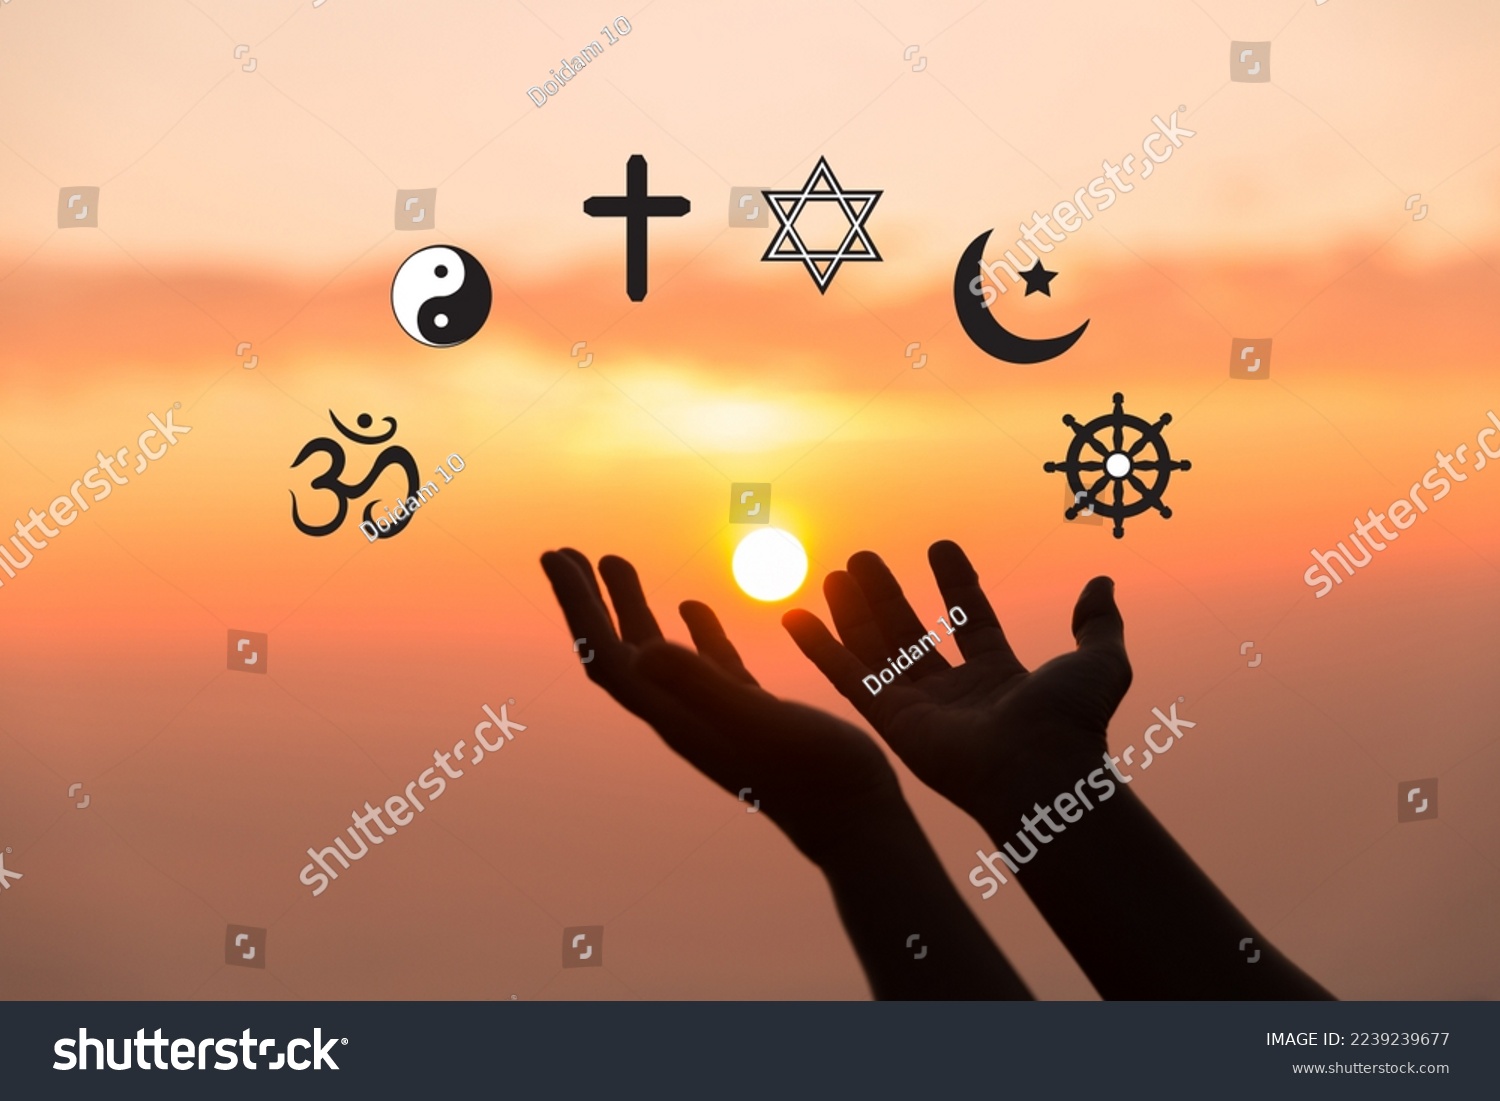 Religious symbols. Christianity cross, Islam crescent, Buddhism dharma wheel, Hinduism aum, Judaism David star, Taoism yin yang, world religion concept. Prophets of all religions bring peace to world. #2239239677